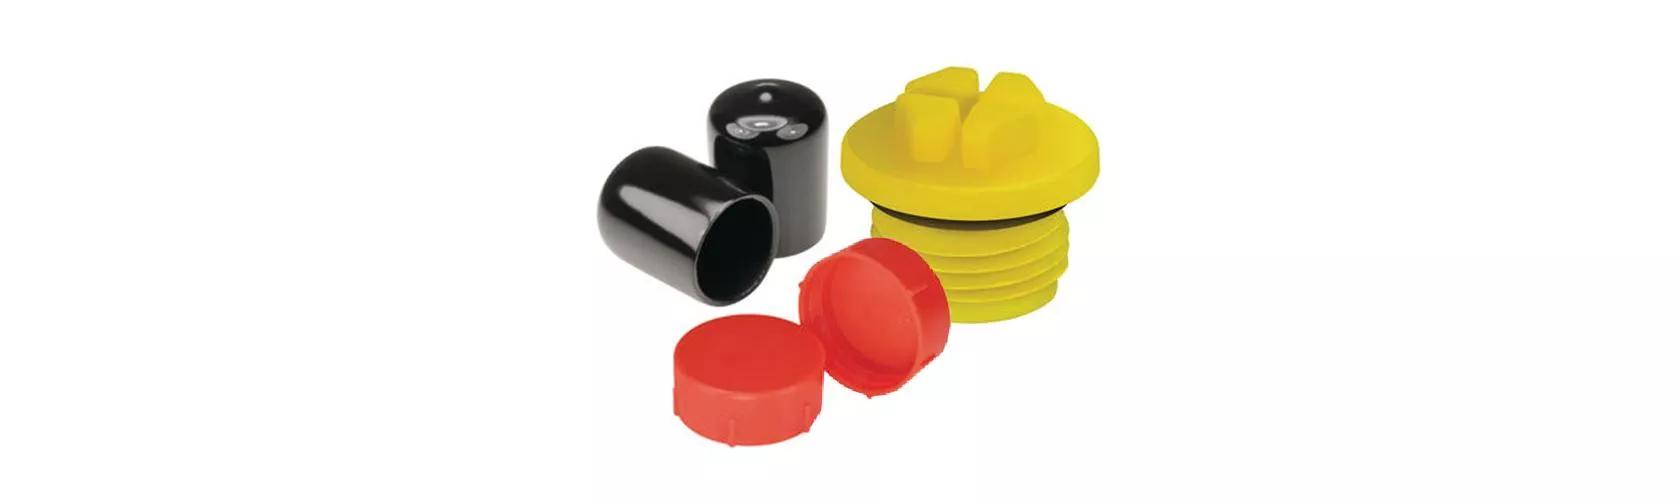 Plastic caps and plugs components